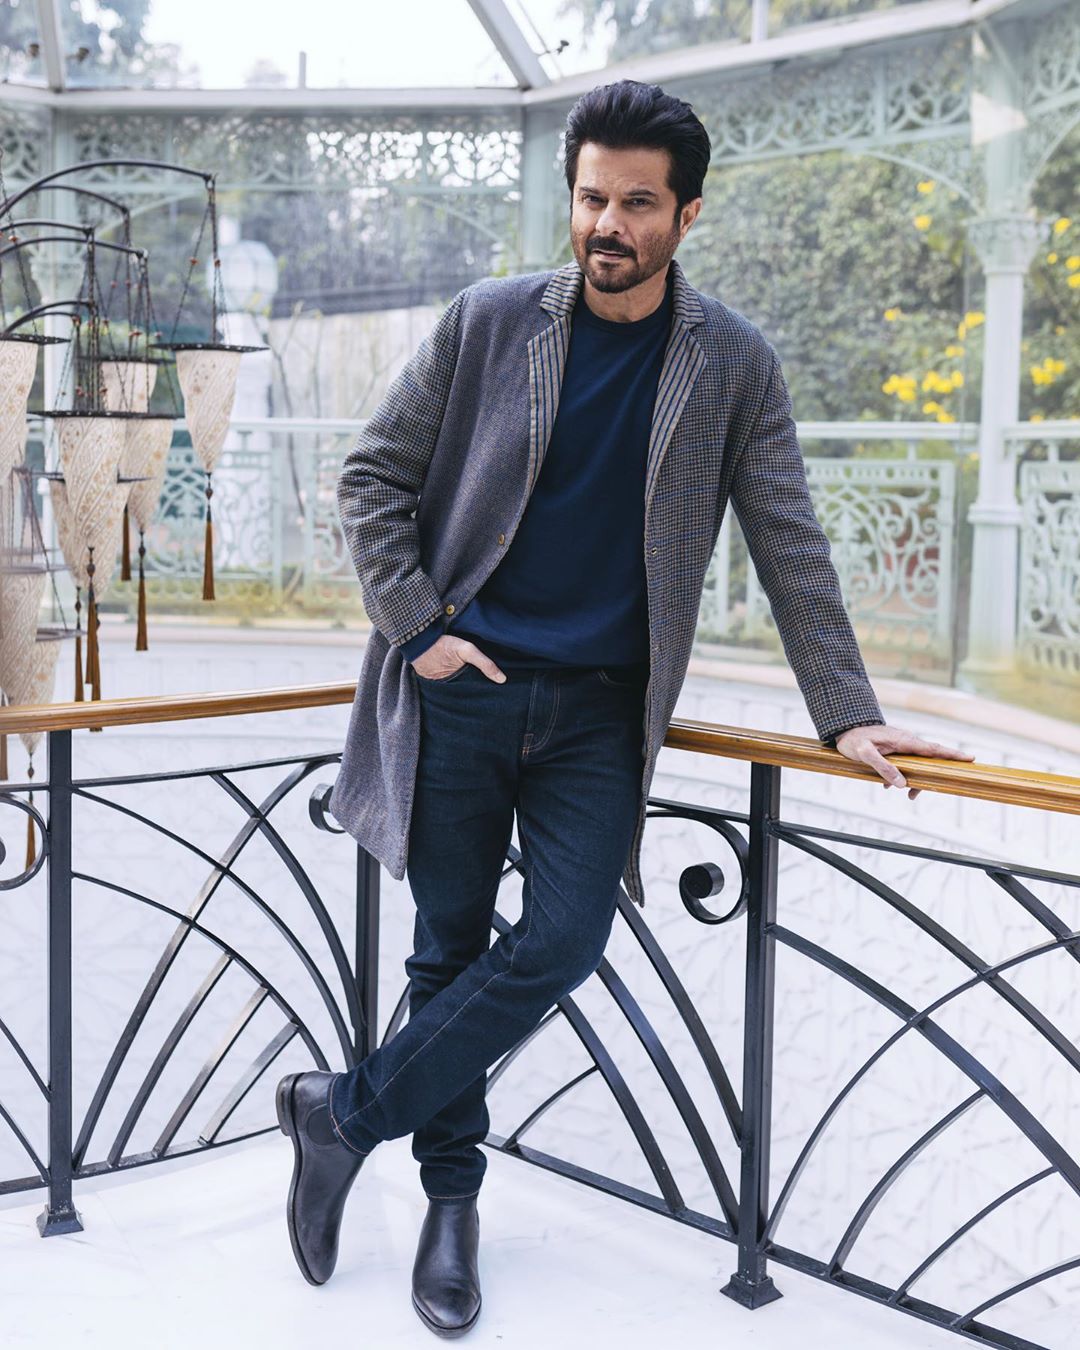 100+ Anil kapoor images, photos, pic with family hd free download 2020